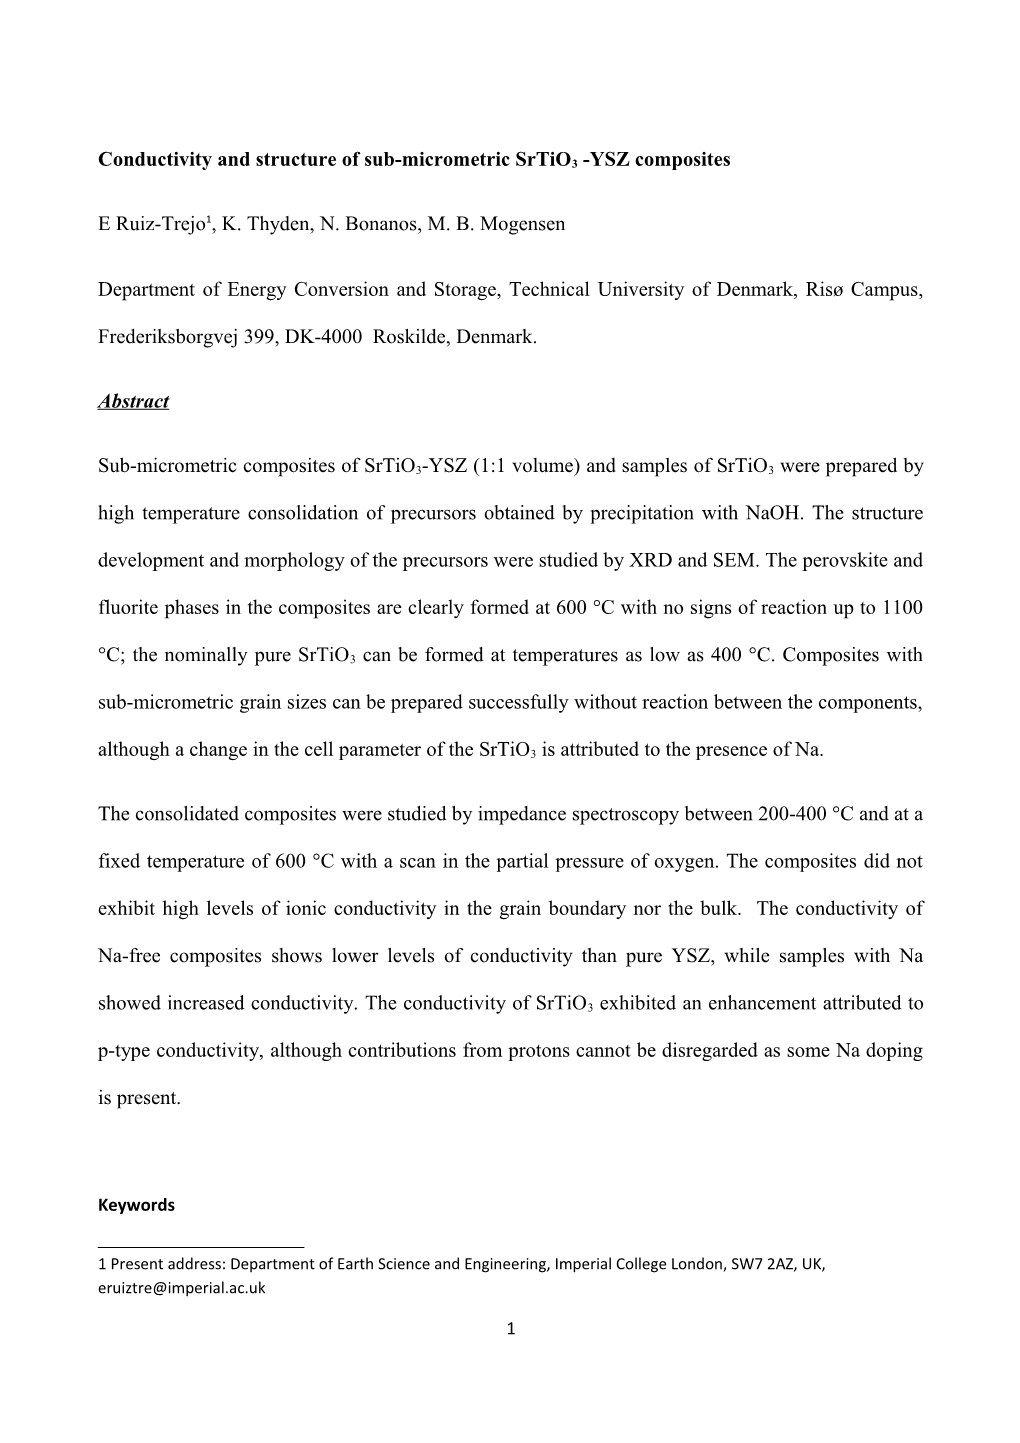 Synthesis and Characterisation of Composites of Srtio3 and YSZ